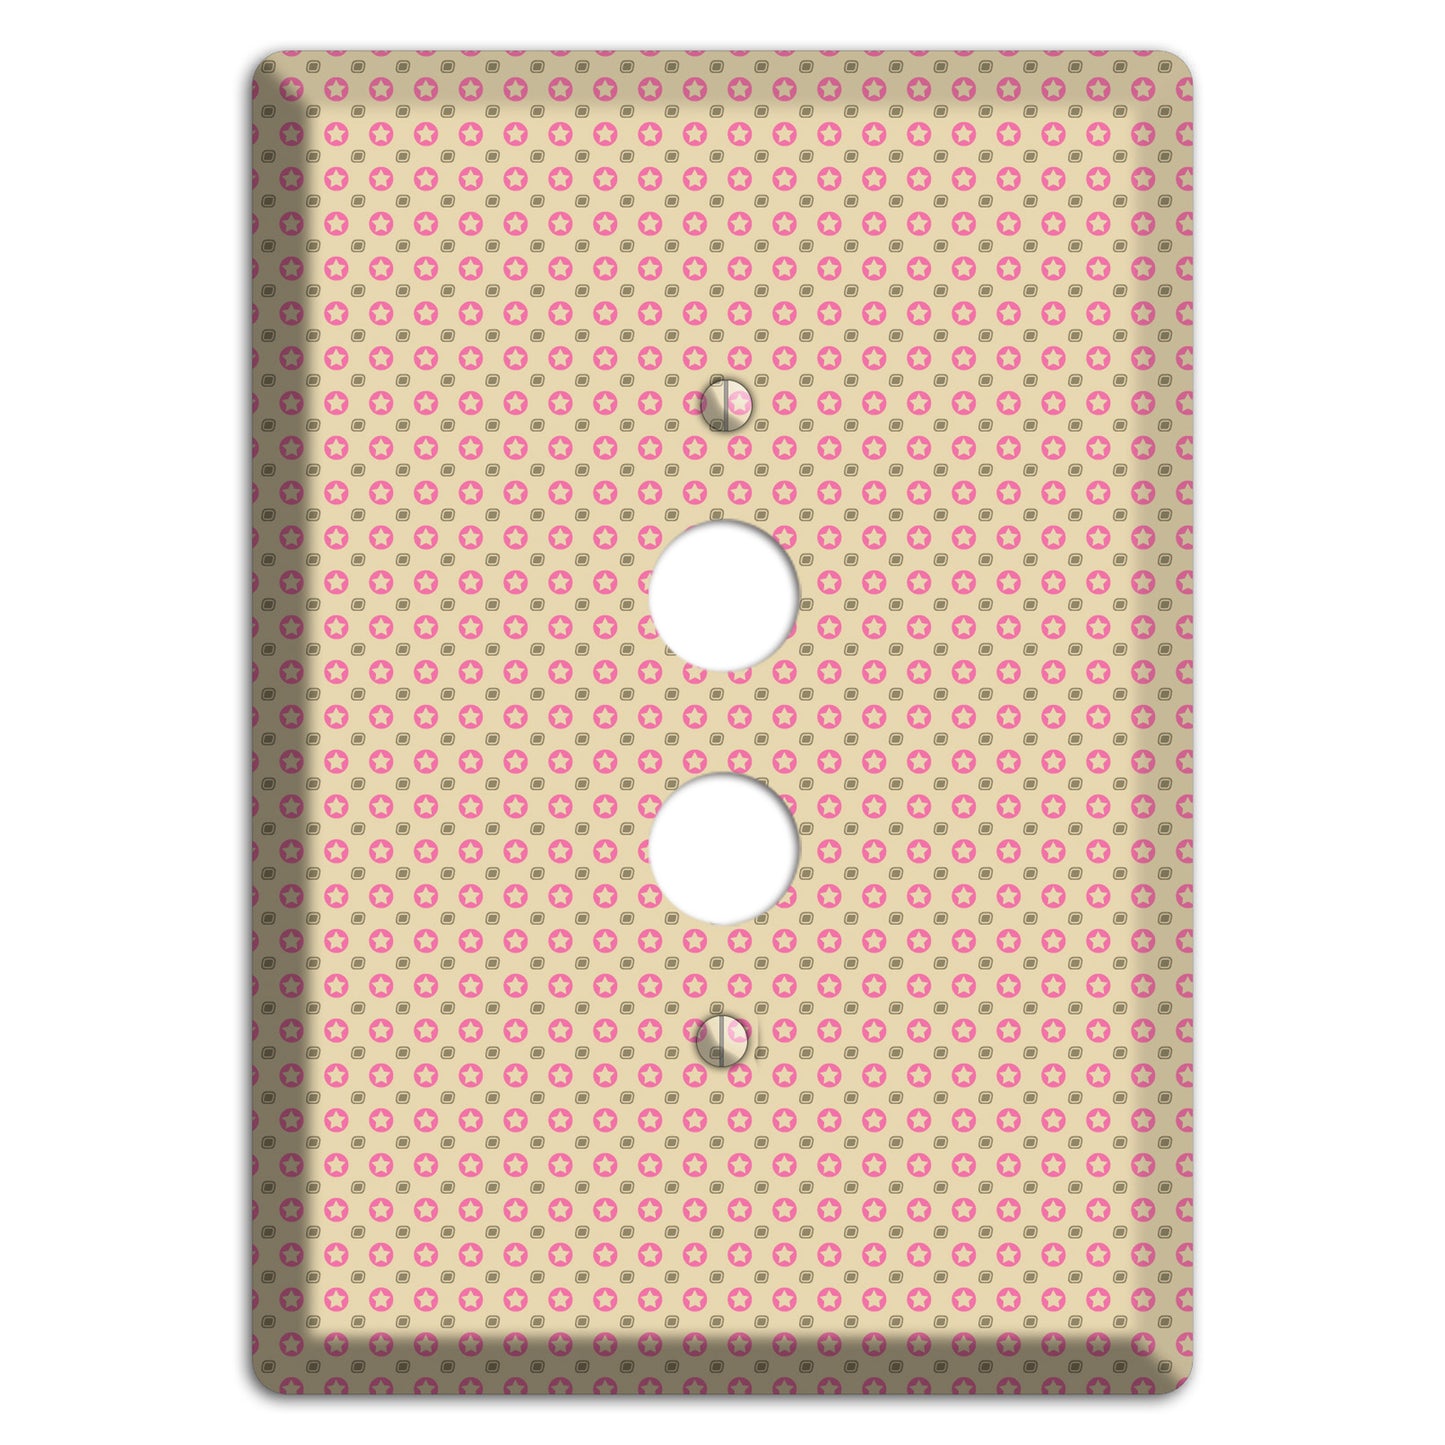 Beige with Pink Stars 1 Pushbutton Wallplate